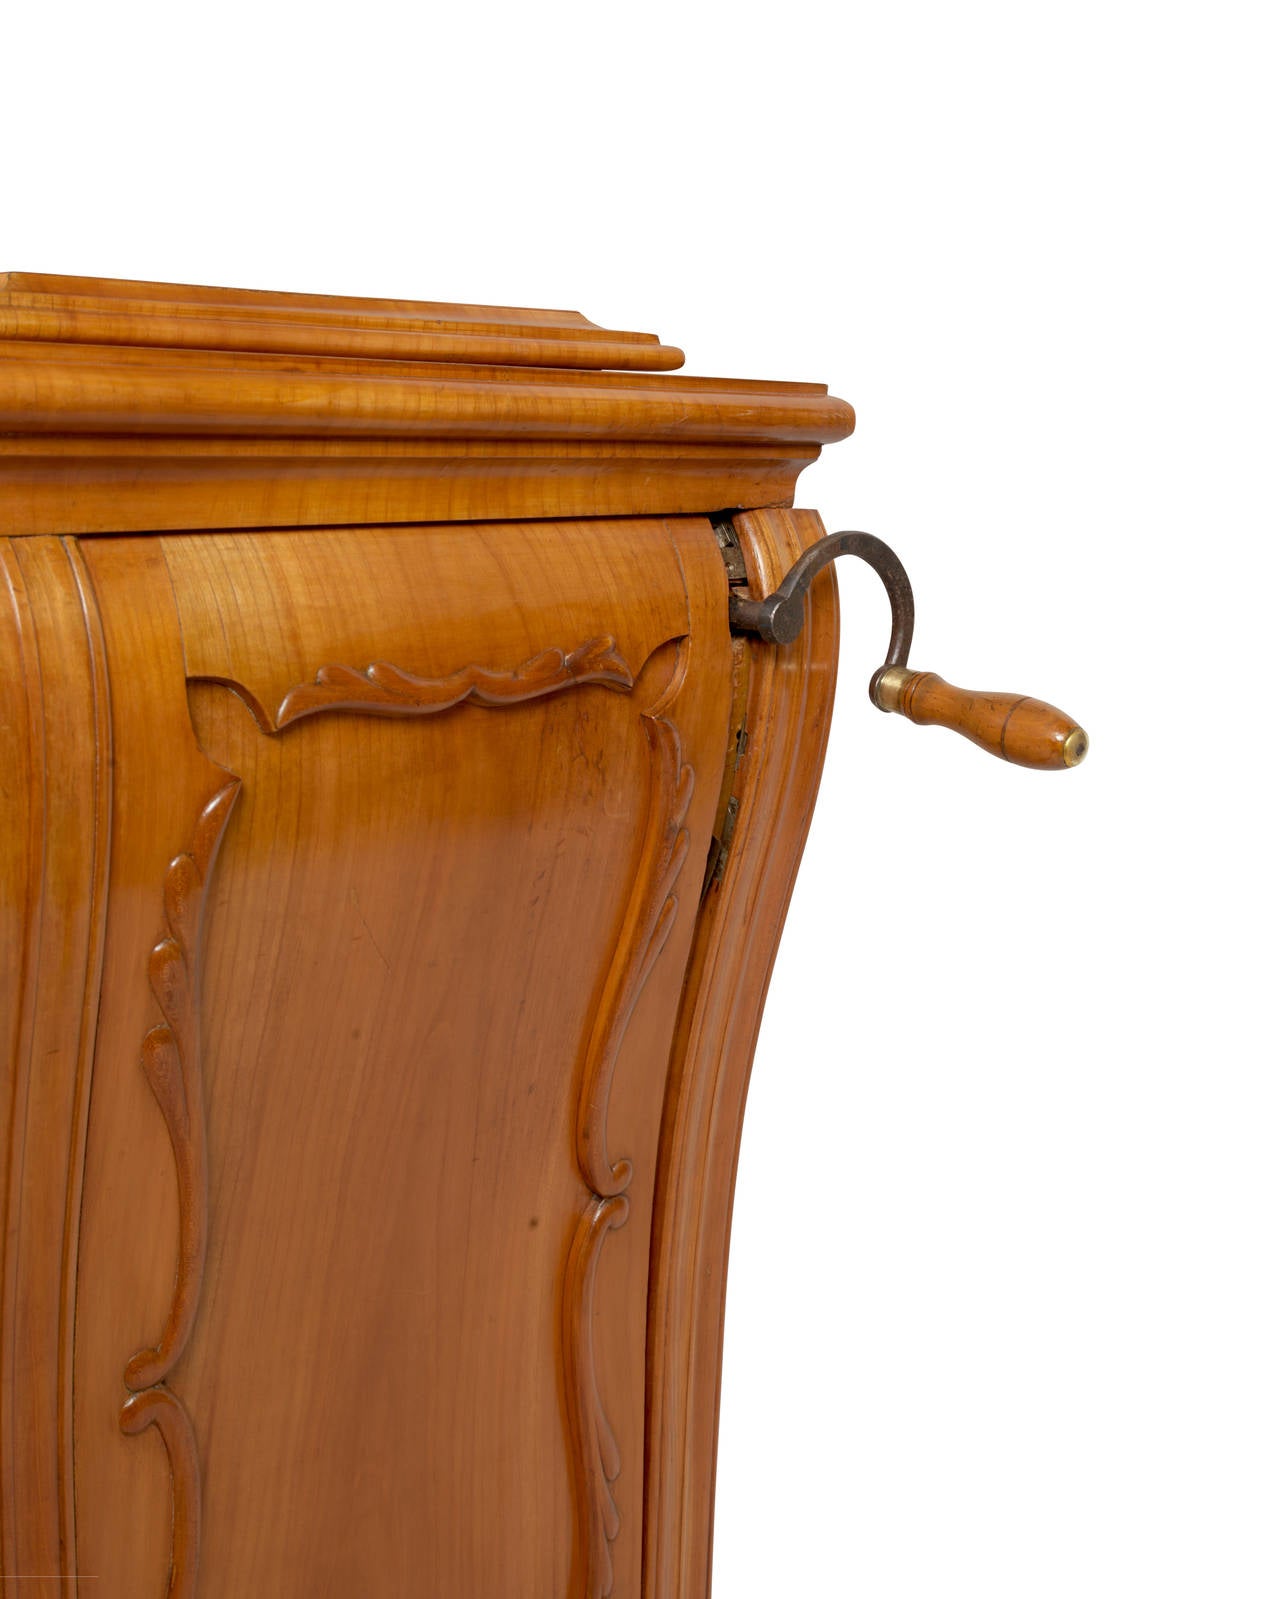 A french art deco cabinet in birchwood, with a hidden keyhole where a glass cabinet can go up and Down, c. 1920